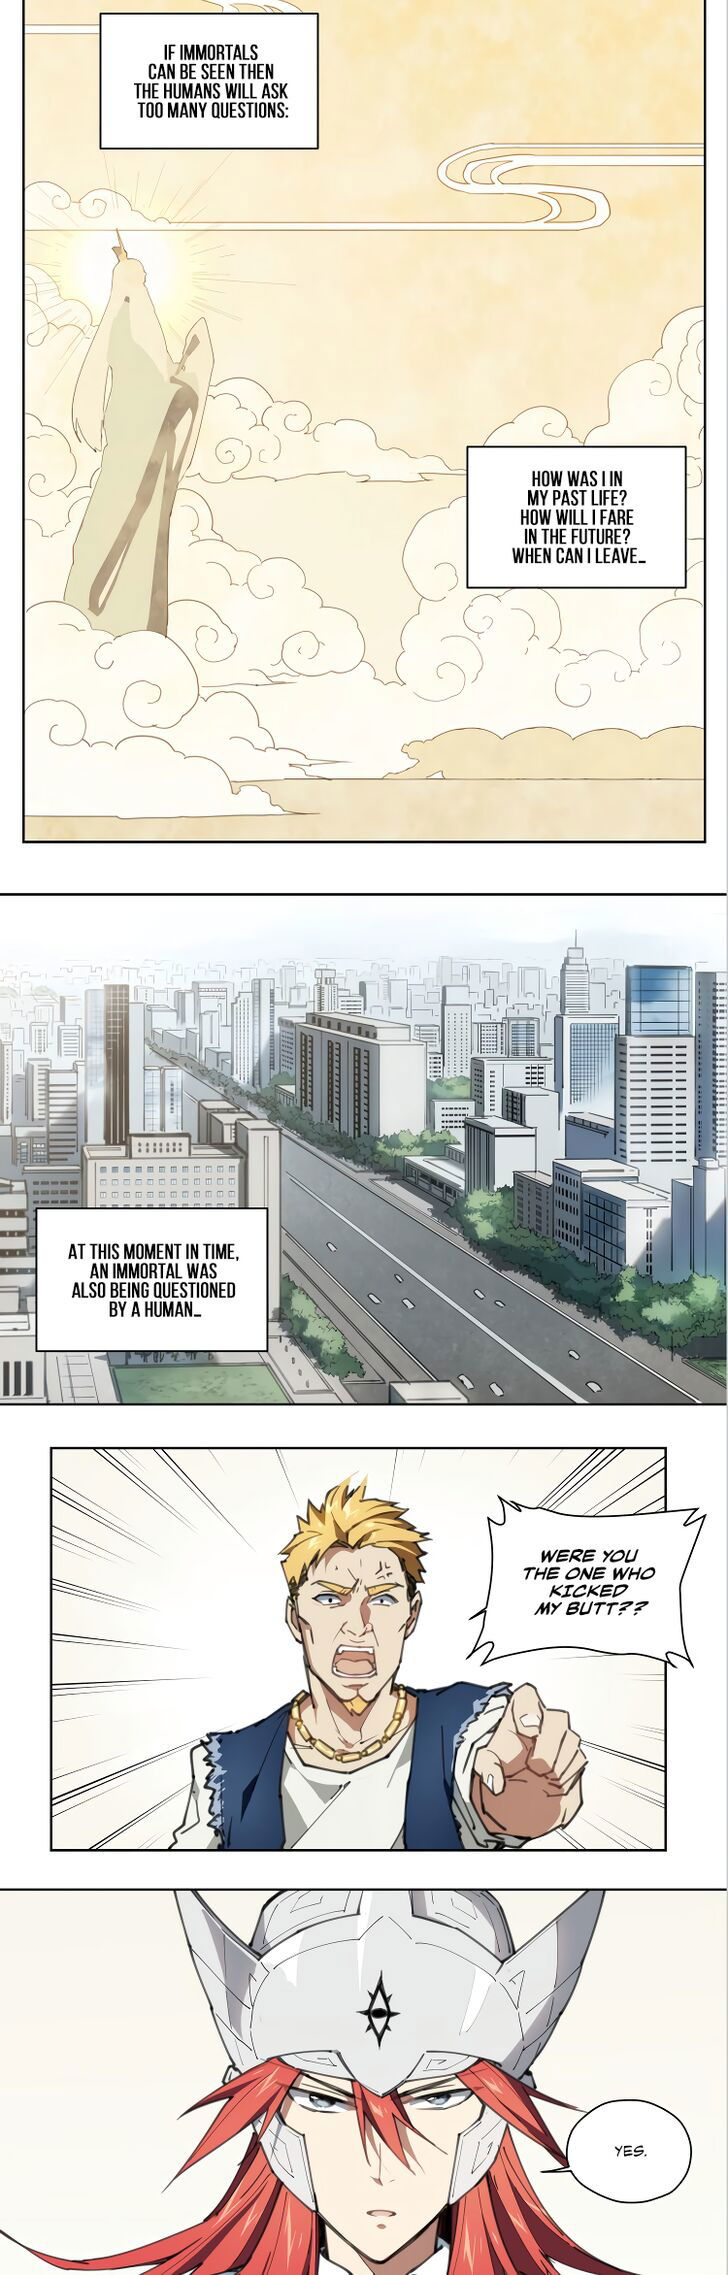 How to be God Chapter 080 page 3